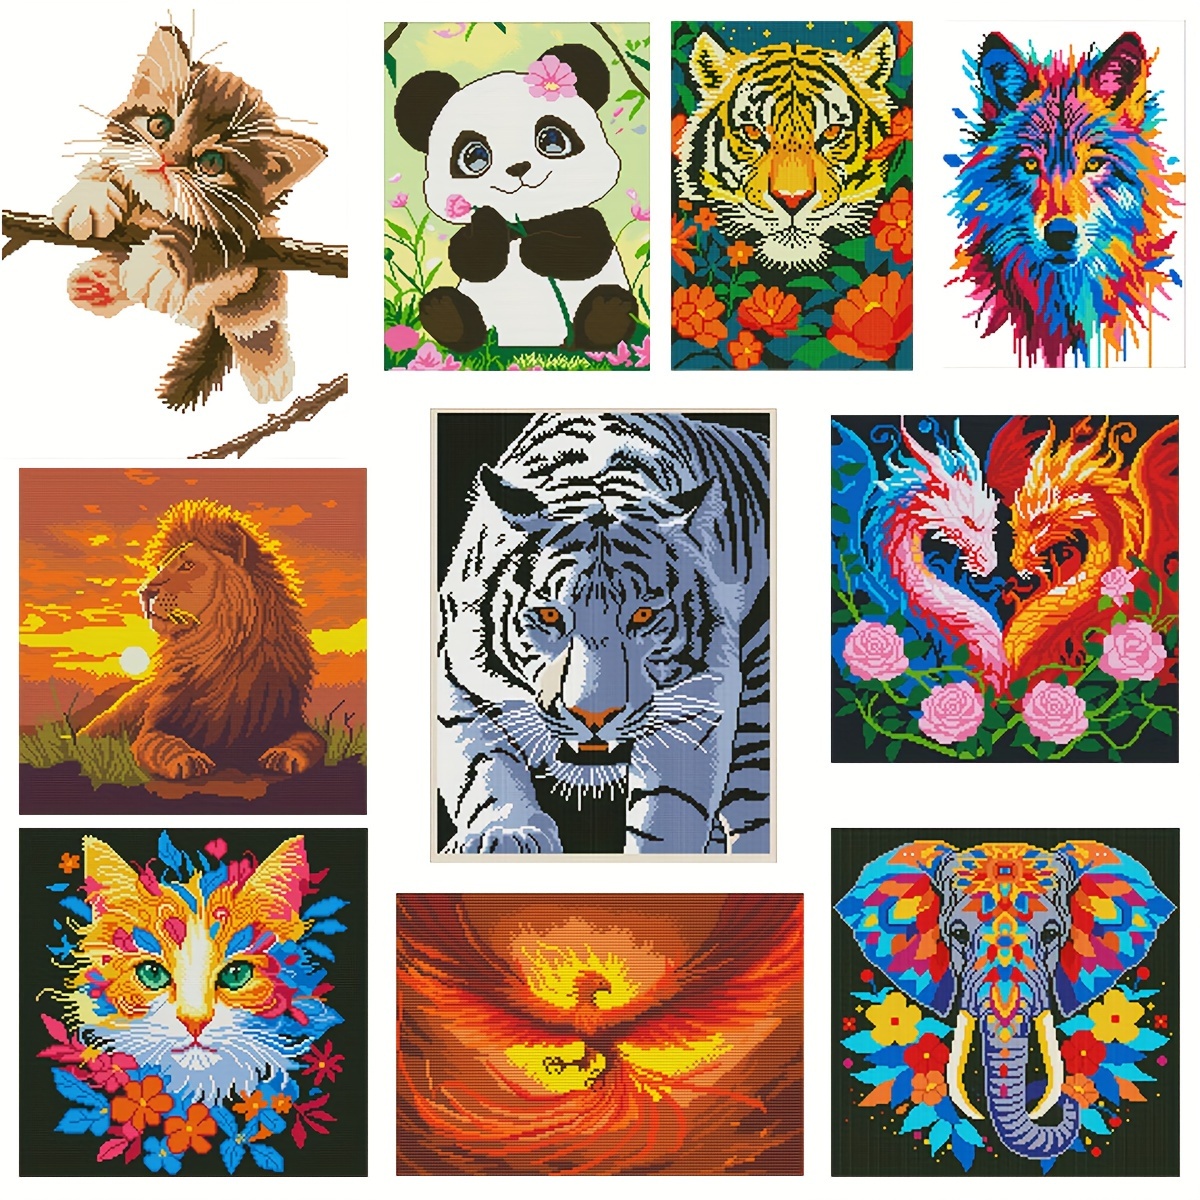 

Animal Series Cross Stitch Kit - Panda, Cat, White Tiger, Phoenix, Wolf, Heart Dragon, Lion, Elephant Designs - 11ct Medium Grid Embroidery Set For Beginners With Pre-printed Fabric And Threads